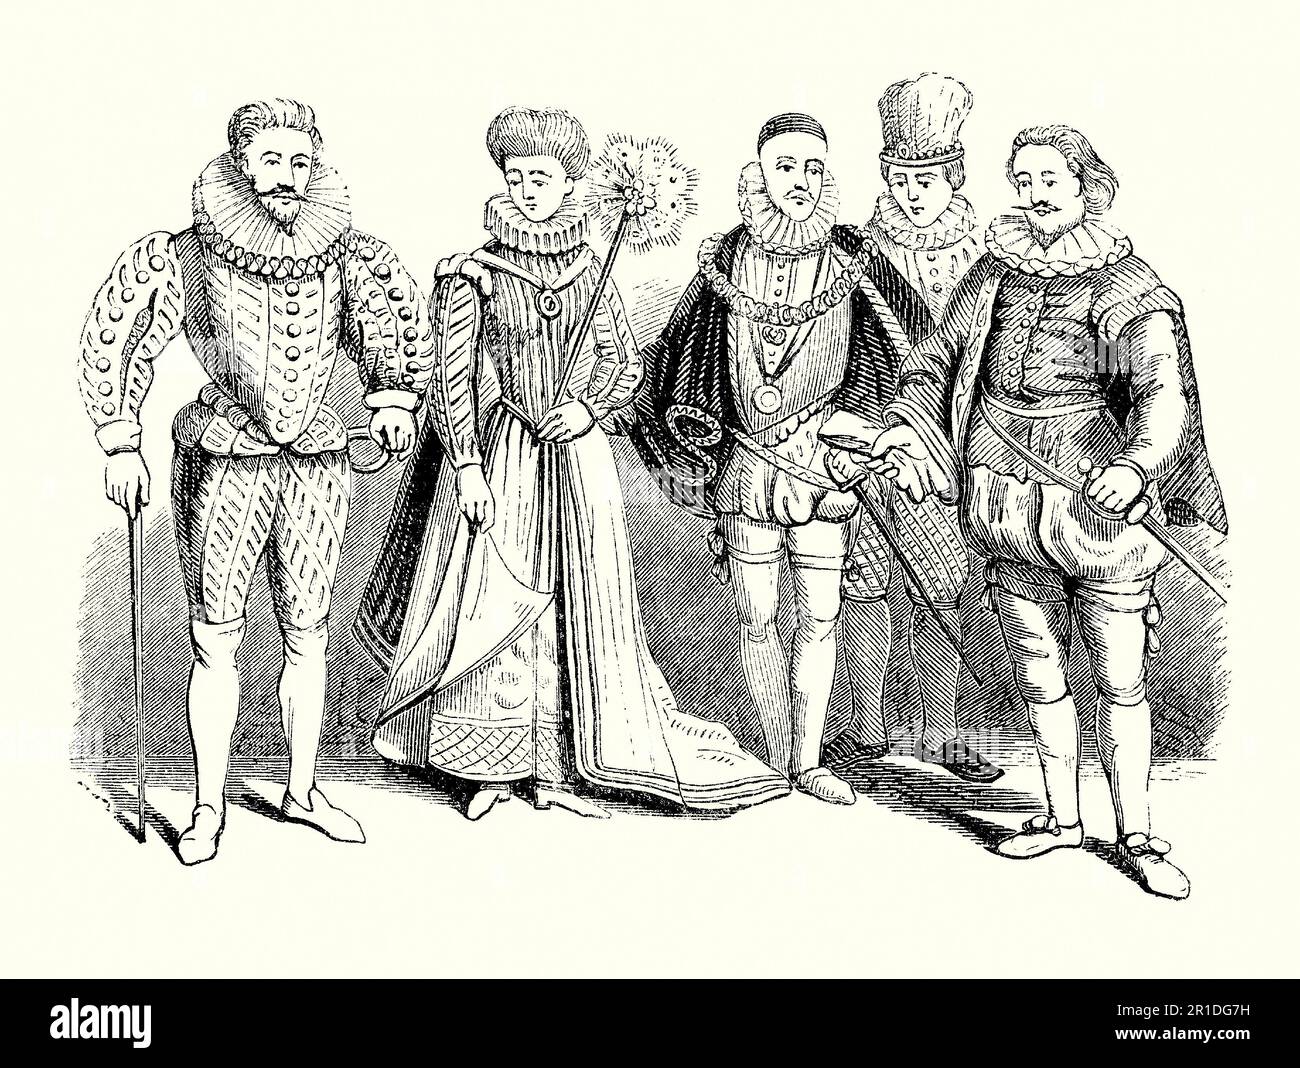 An old engraving of clothing worn in Tudor/Elizabethan times in England. The style of dress dates from latter part of the 16th and early 17th centuries during the reign of Elizabeth I (1558–1603). More variety crept into taste and fashions of the era. Women’s clothes featured long dresses and robes often embroidered with jewels. Neck ruffs were popular. For men doublet and hose were worn, with breeches of various lengths below a tapered/narrow waist or cod-piece. Short cloaks worn over this. These would have been worn by those in society with money, landed gentry and the nobility at court. Stock Photo